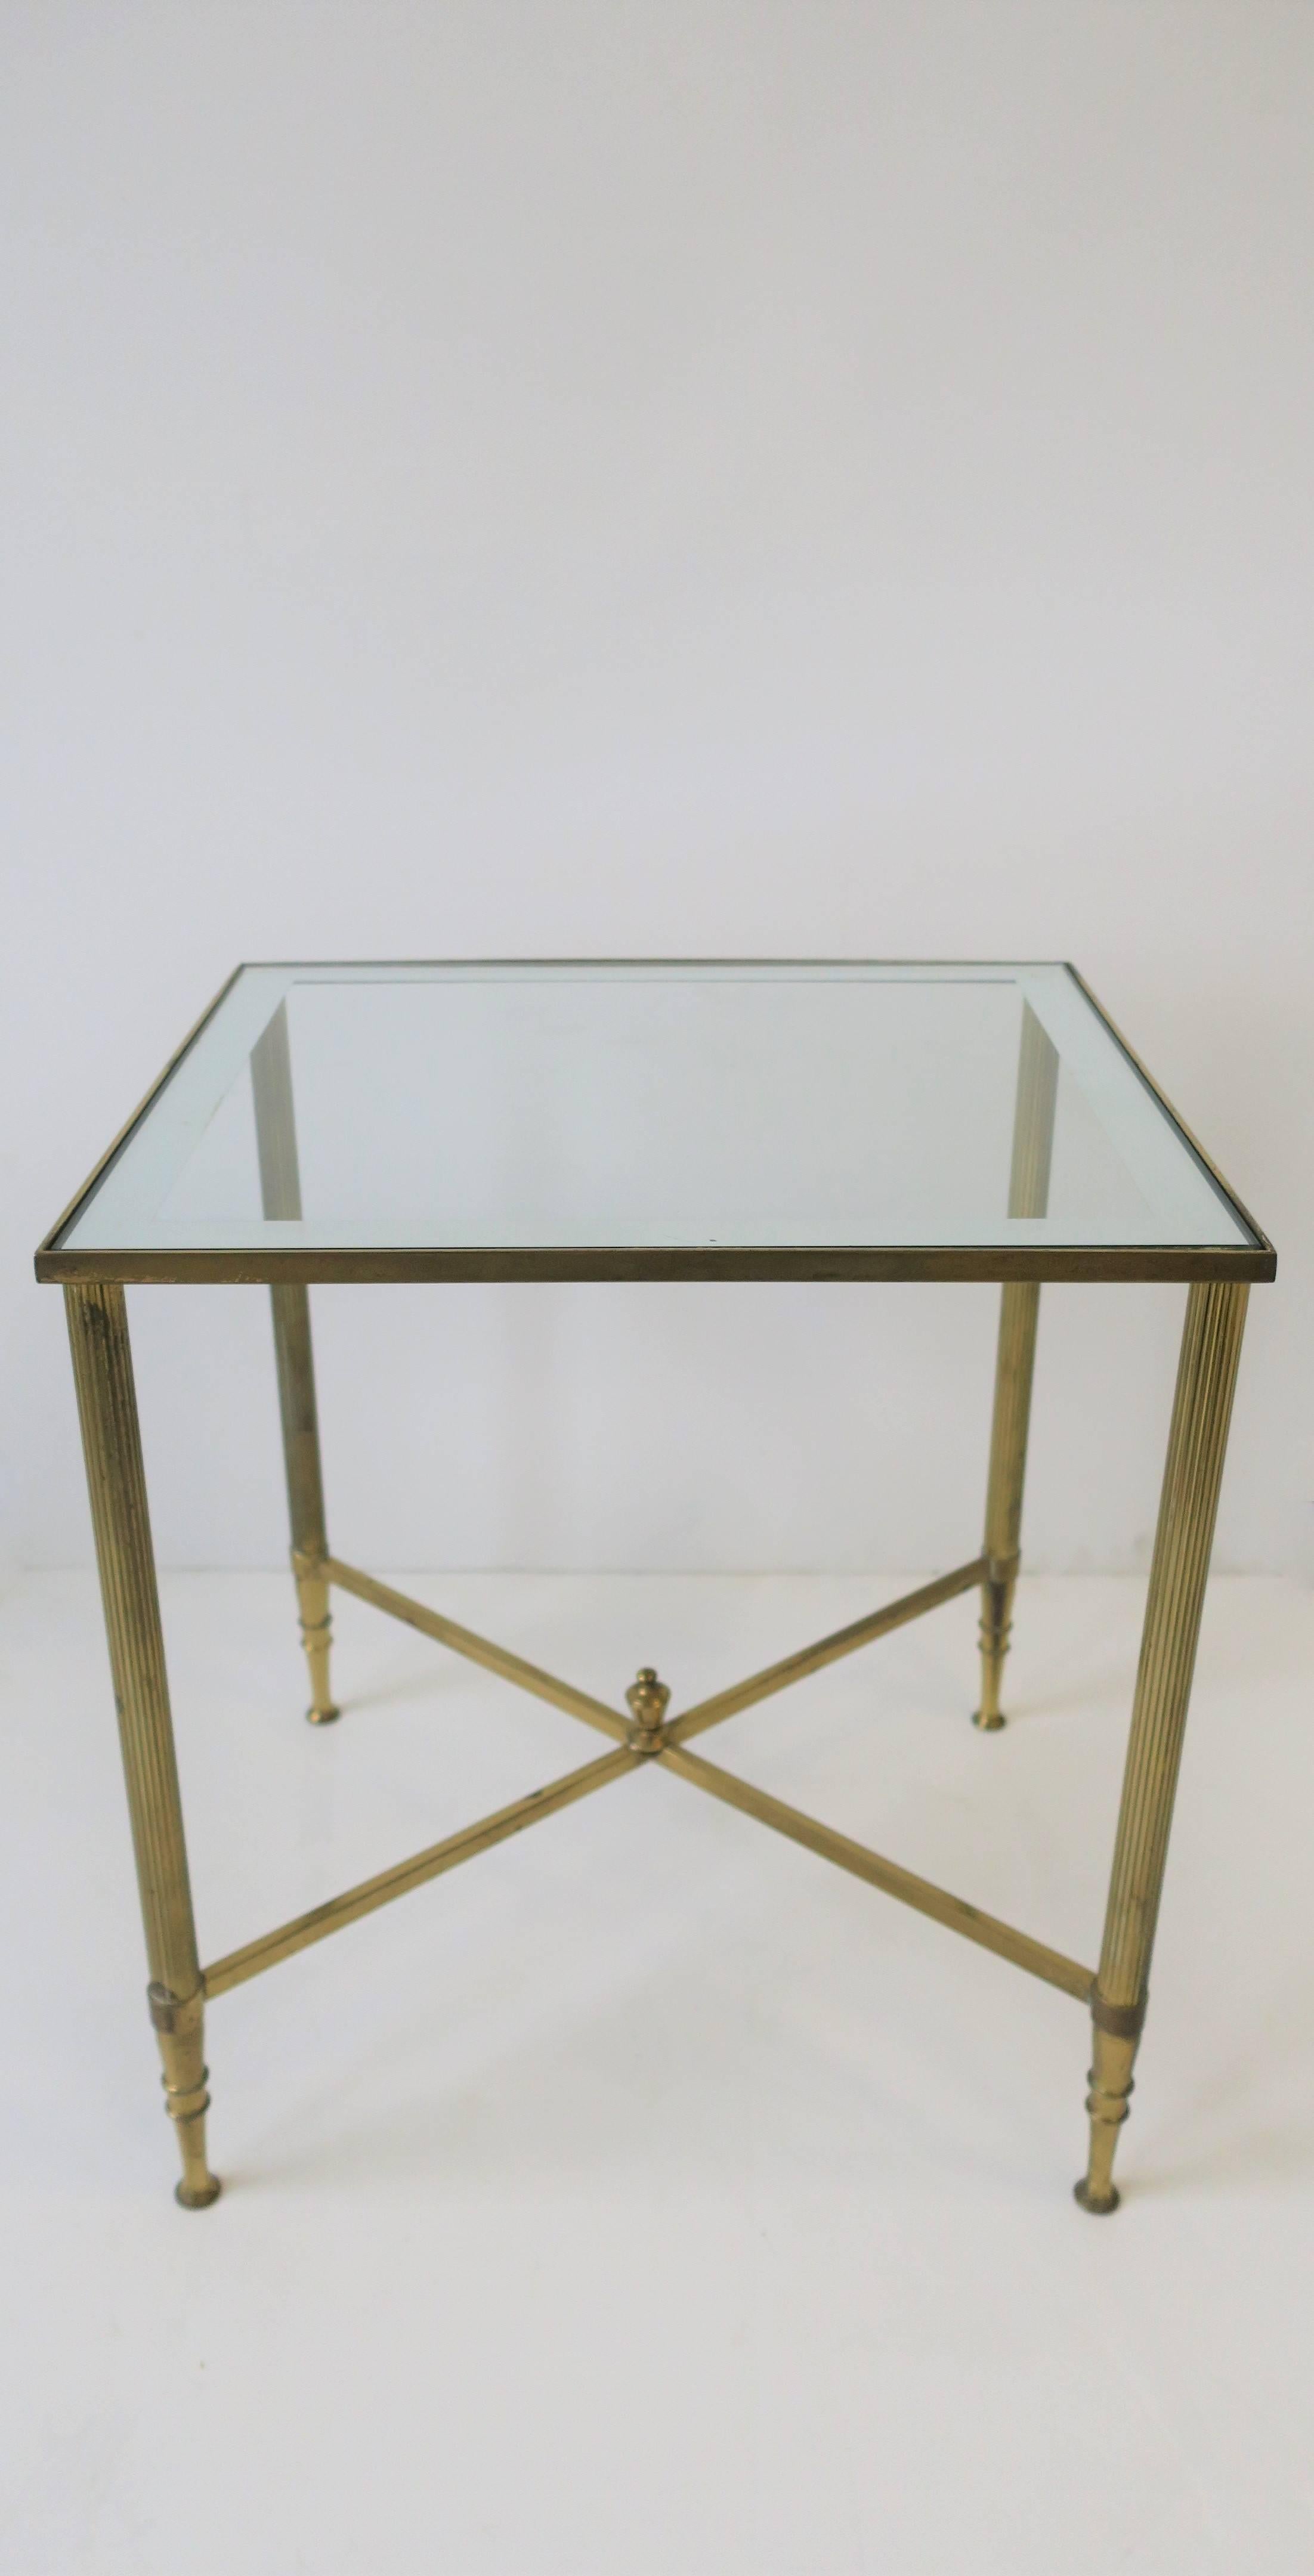 Mid-20th Century Italian Brass and Glass Side or Drinks Table in the Directoire Style